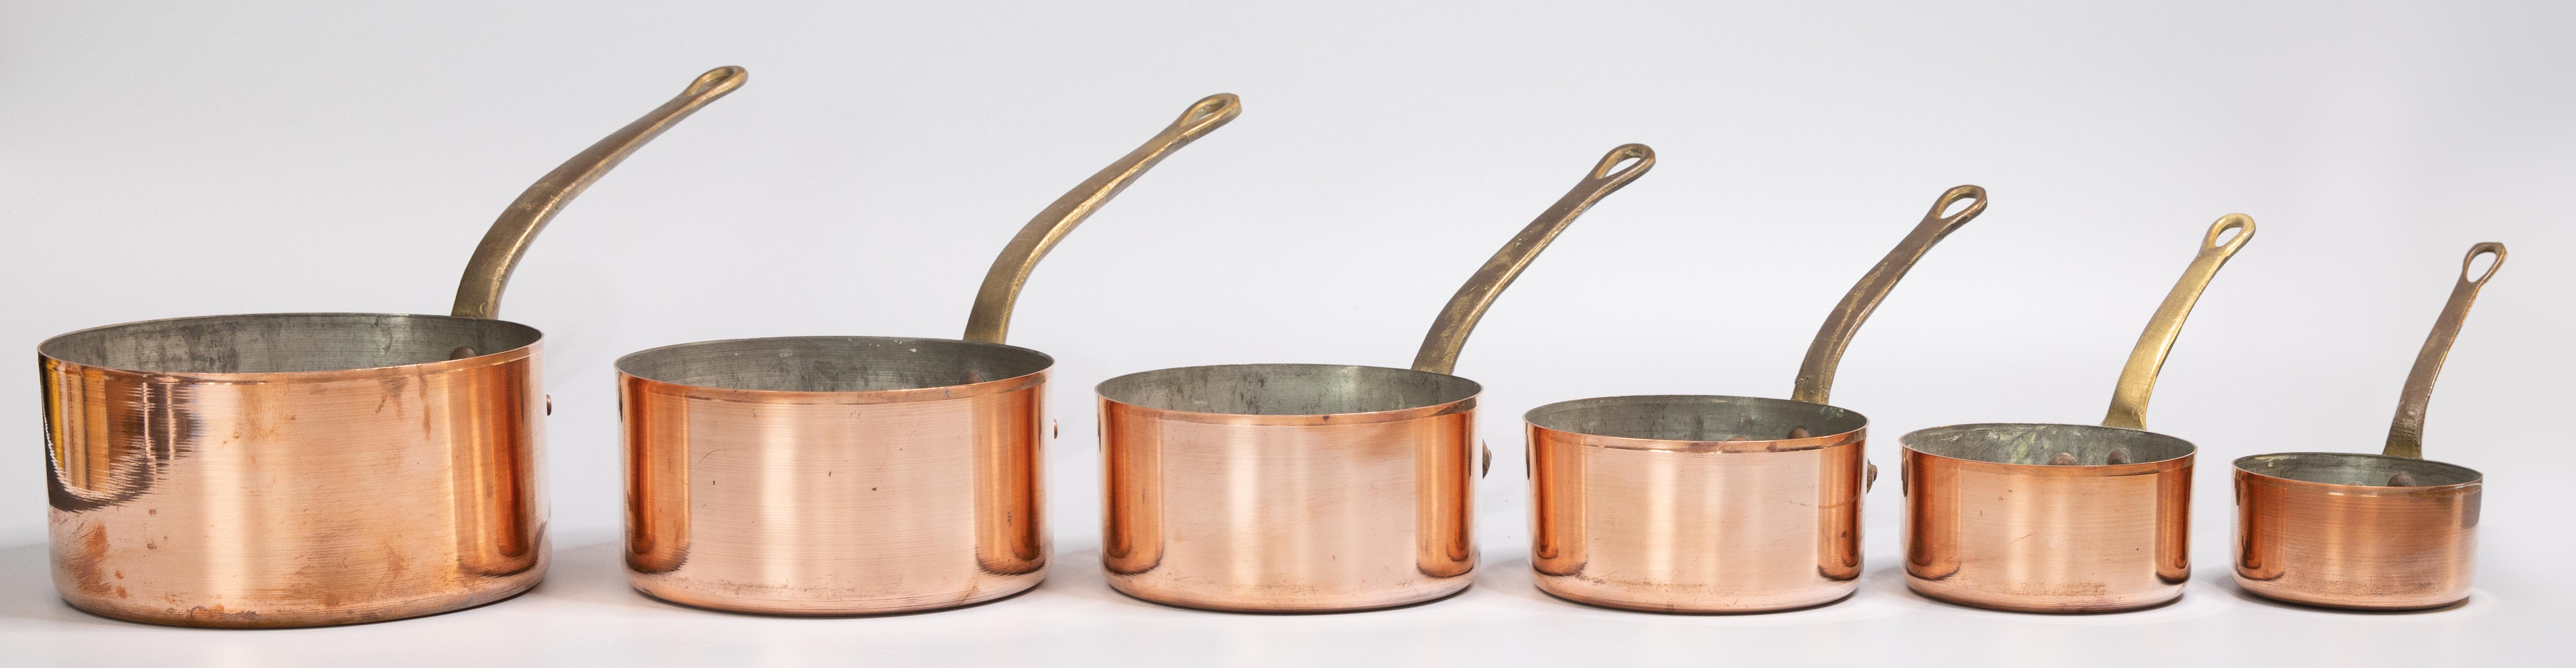 A gorgeous set of six antique 19th century French copper sauce pans. The lovely long handles are solid brass and the pots have a beautiful patina. They are perfect for French Country decor, beautiful hanging on a pot rack or wall.

Saucepans